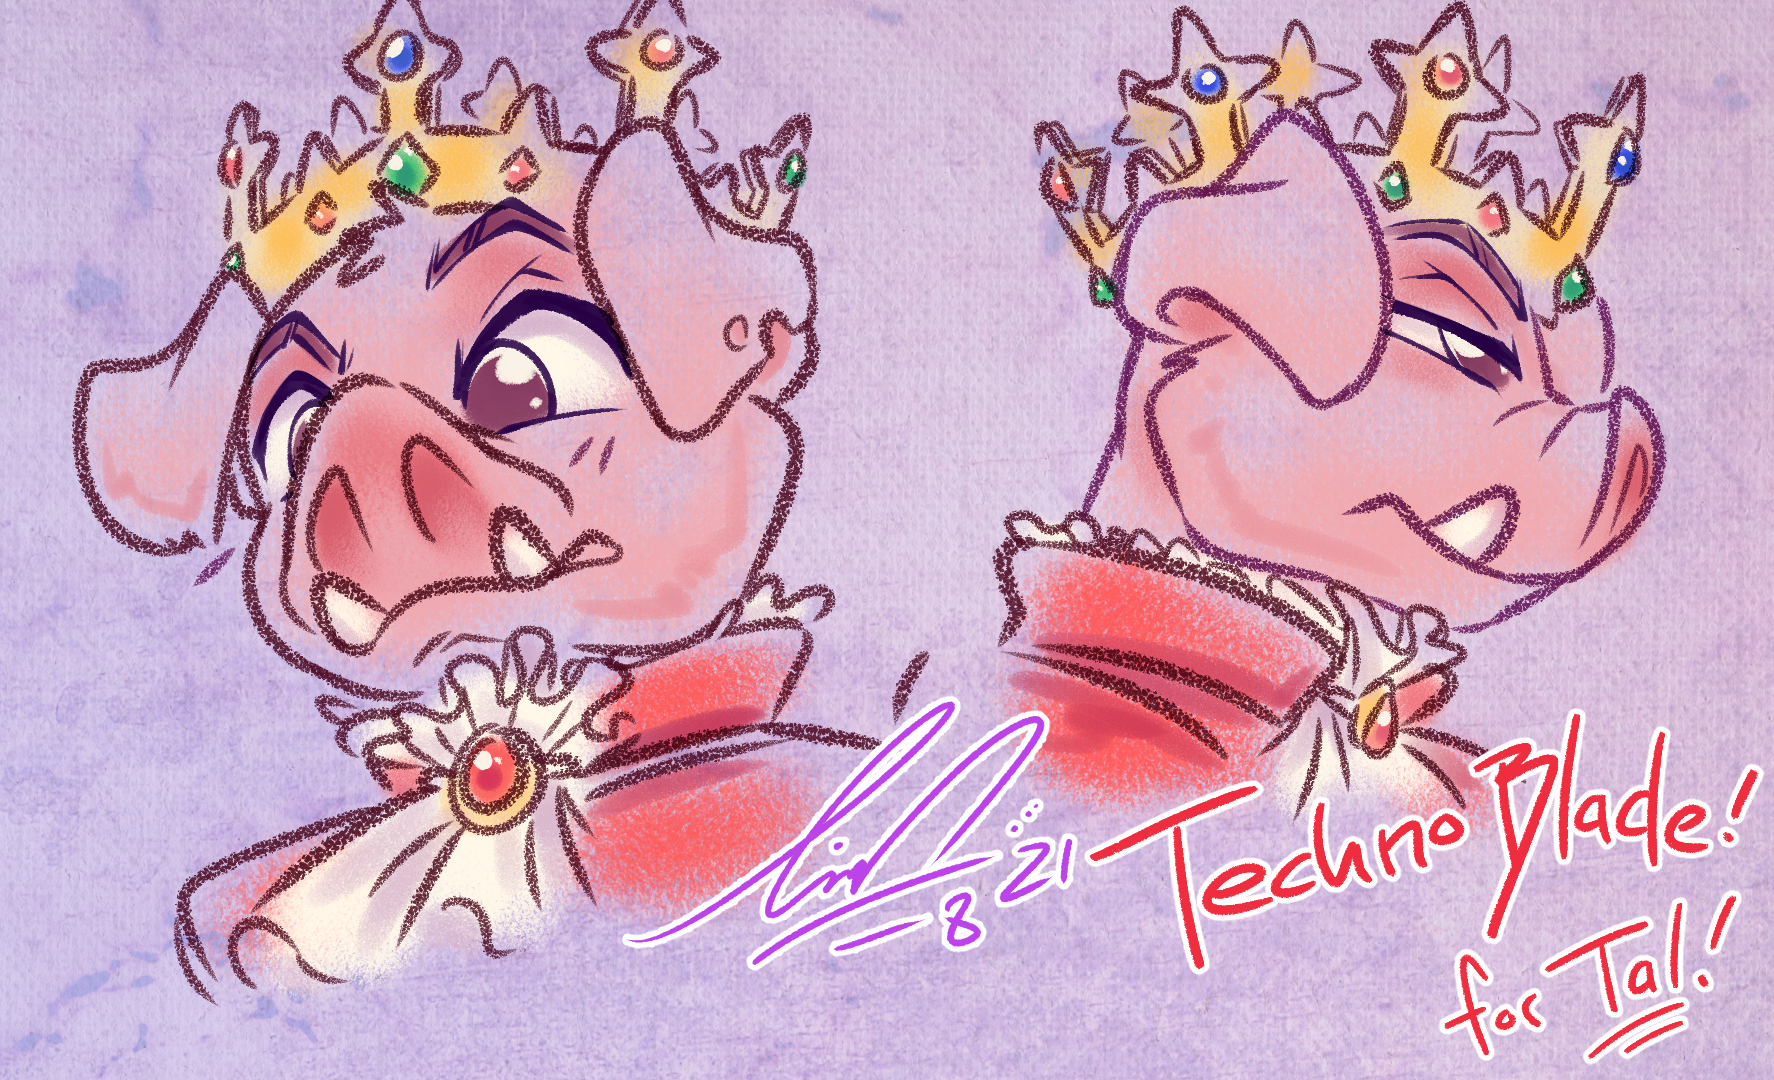 A drawing of Technoblade's crown I made a while ago. Rest in Peace